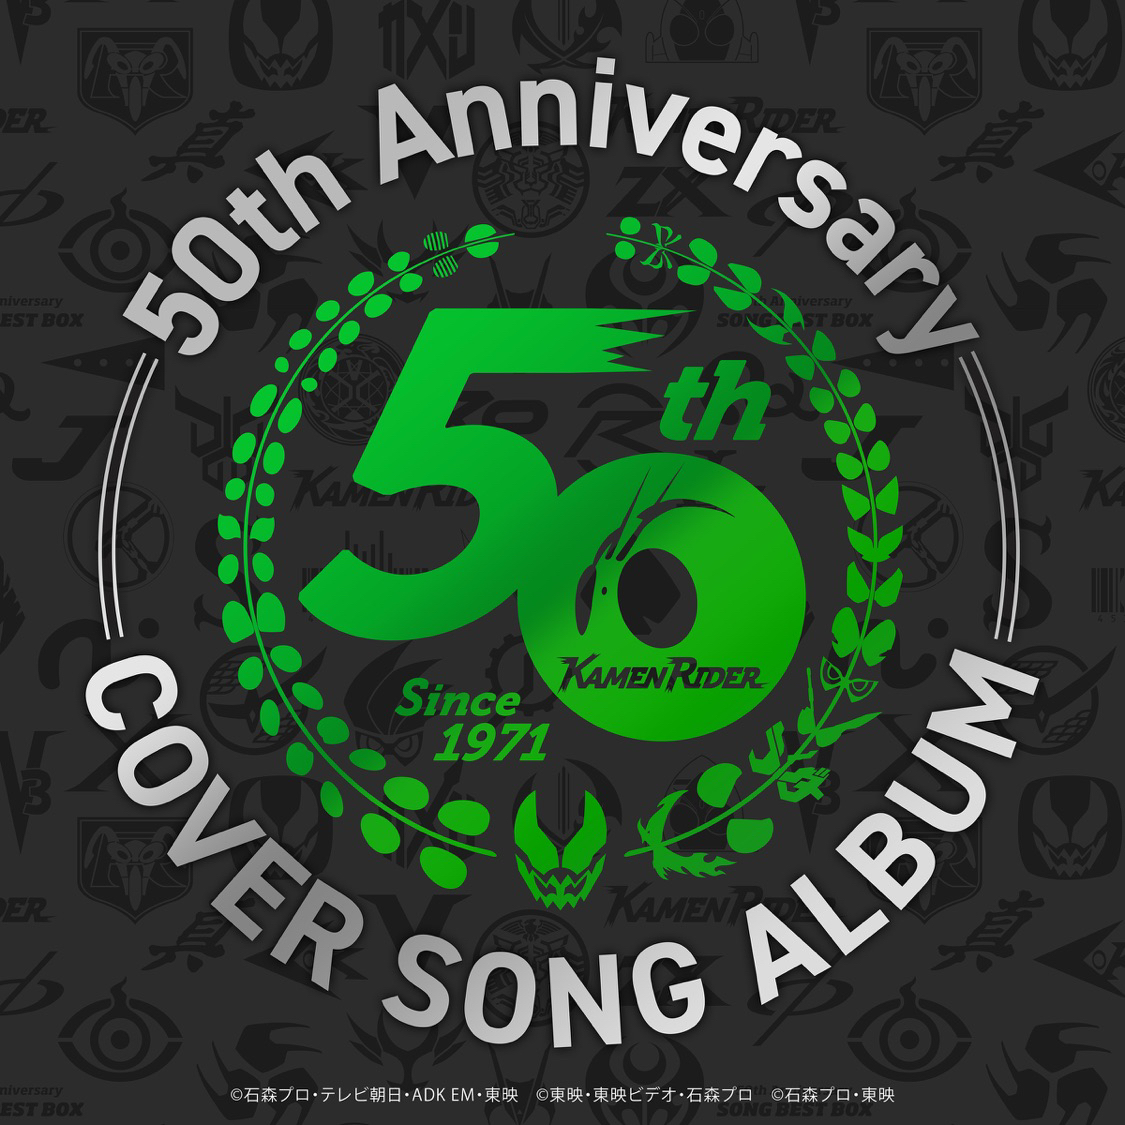 S.O.S 50th Anniversary COVER Ver. by ユートピア(中川大輔、砂川脩弥、山口大地、中山咲月) #NowPlaying https://t.co/g28xFFdOs9